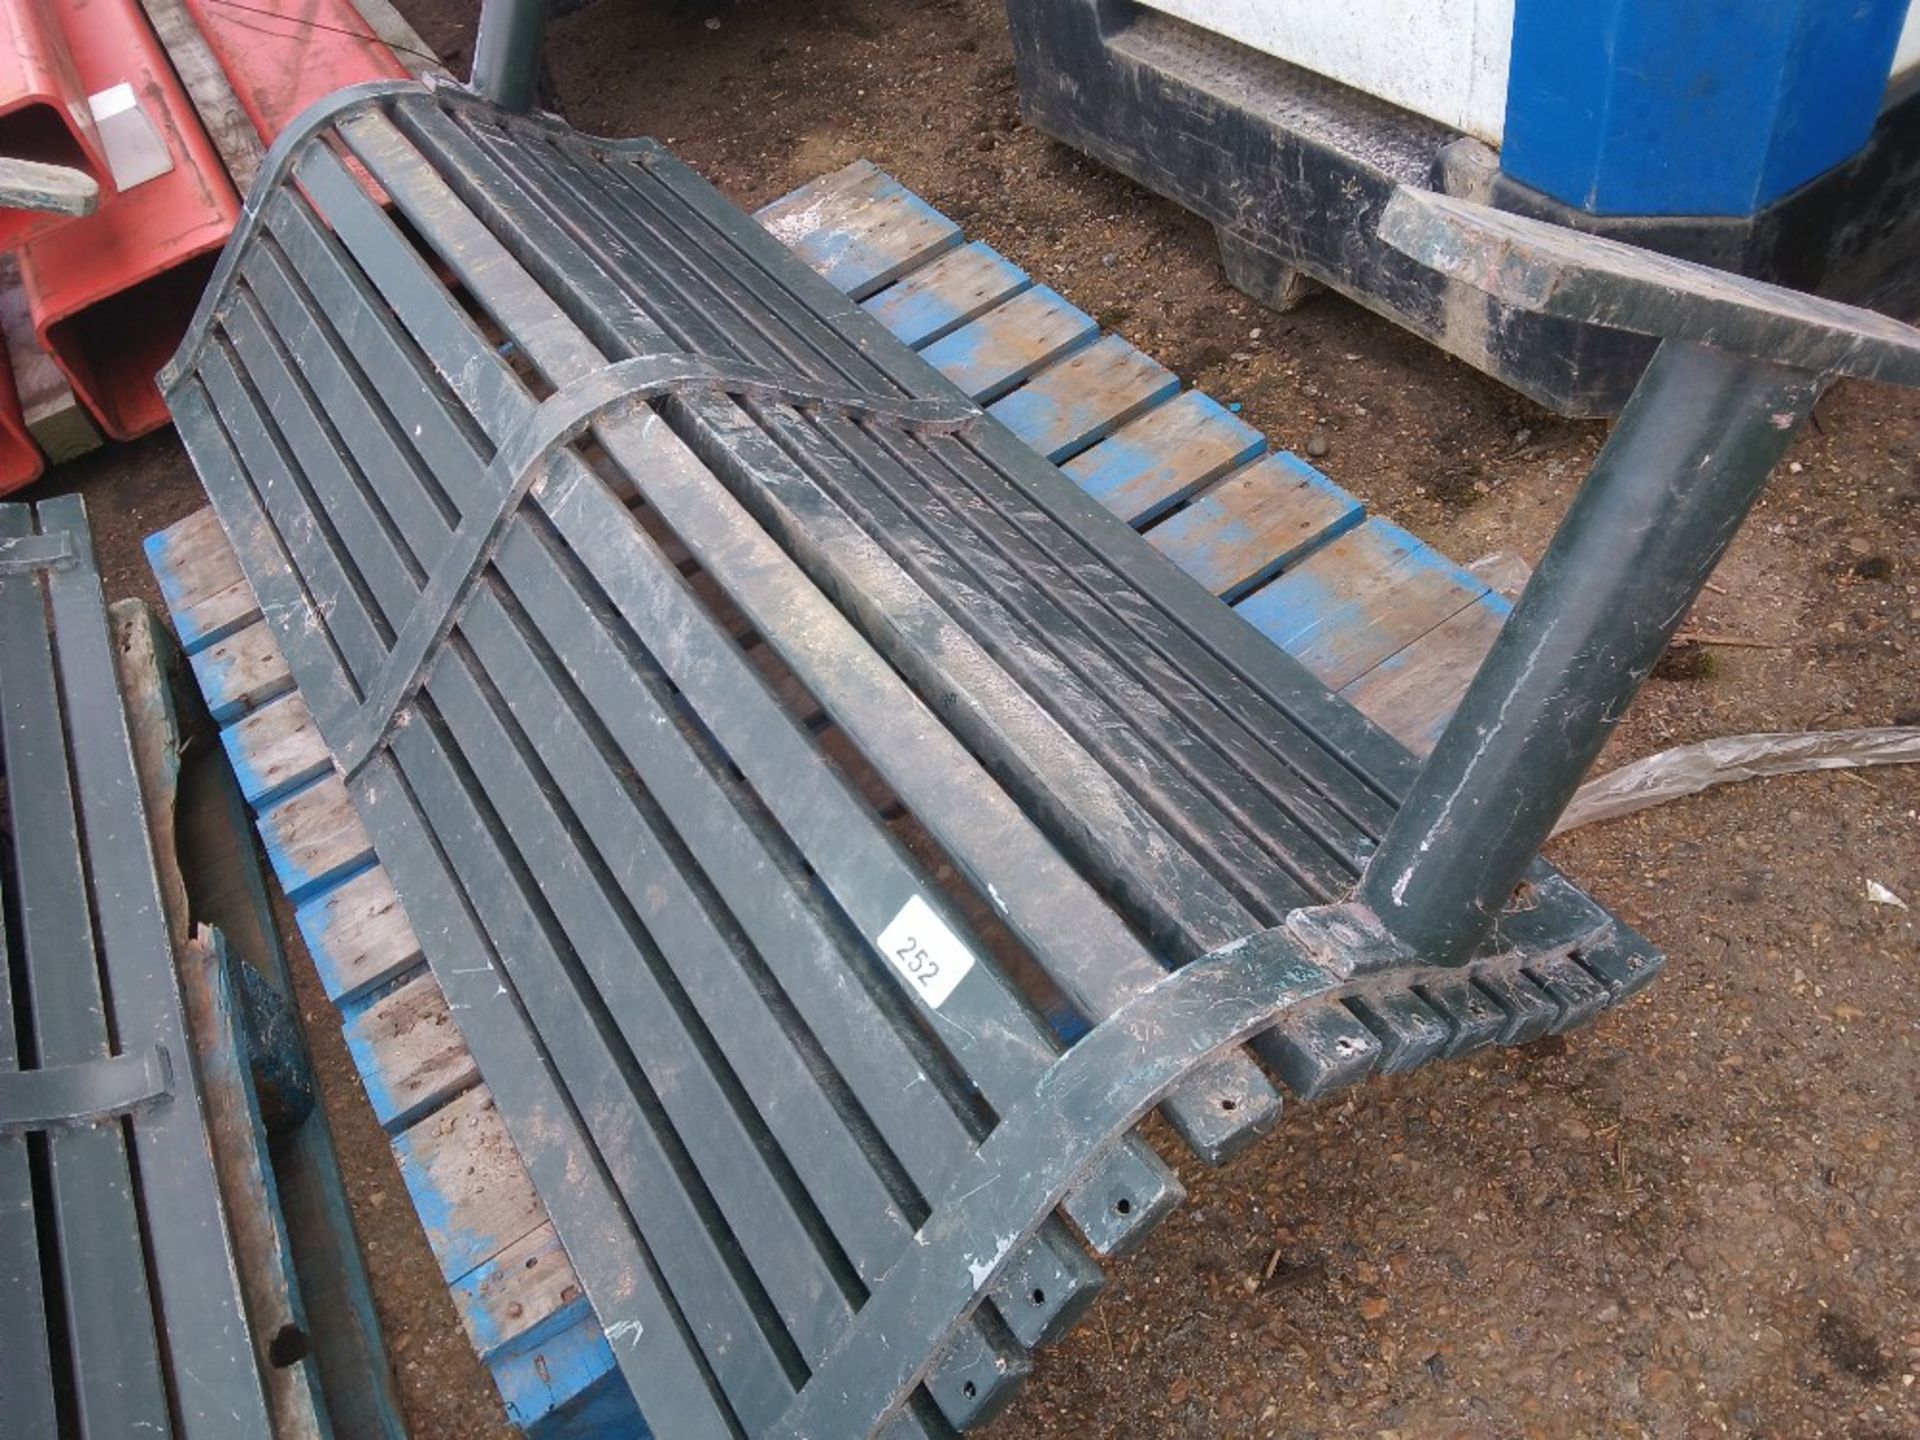 HEAVY DUTY METAL PARK BENCH, 1.8M WIDE, GALVANISED AND GREEN PAINTED. THIS LOT IS SOLD UNDER THE